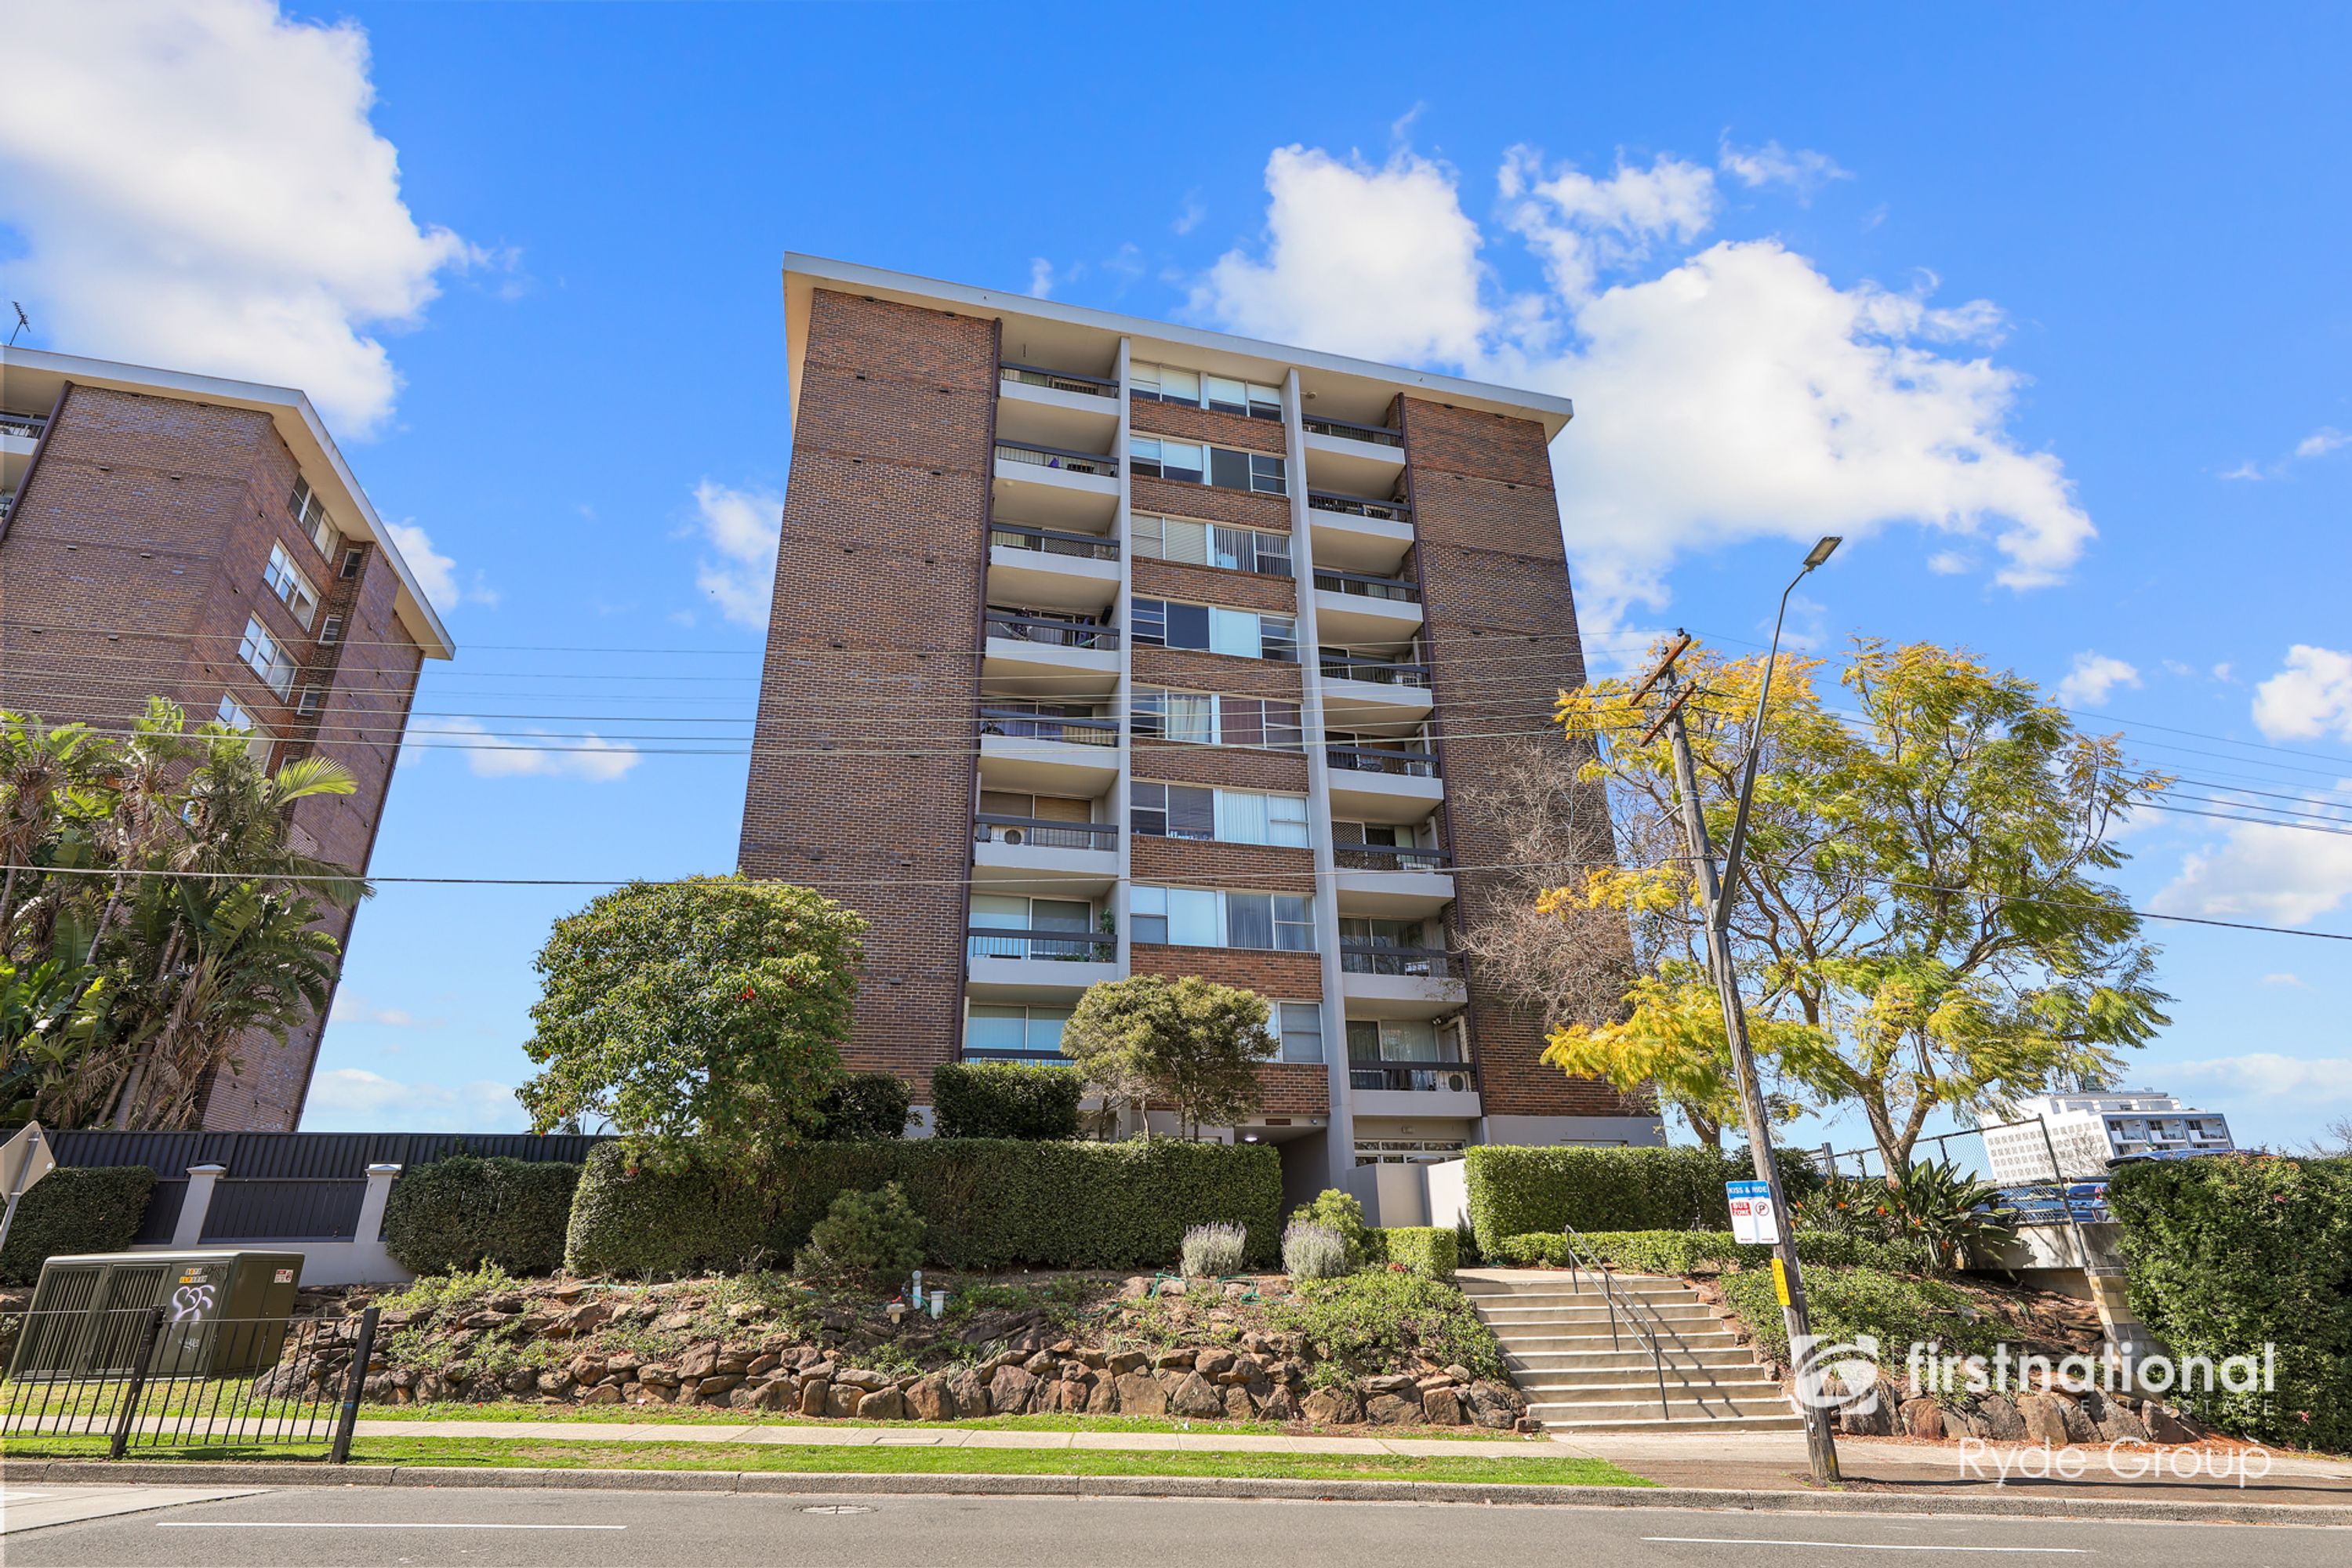 59/57-61 West Parade, West Ryde, NSW 2114